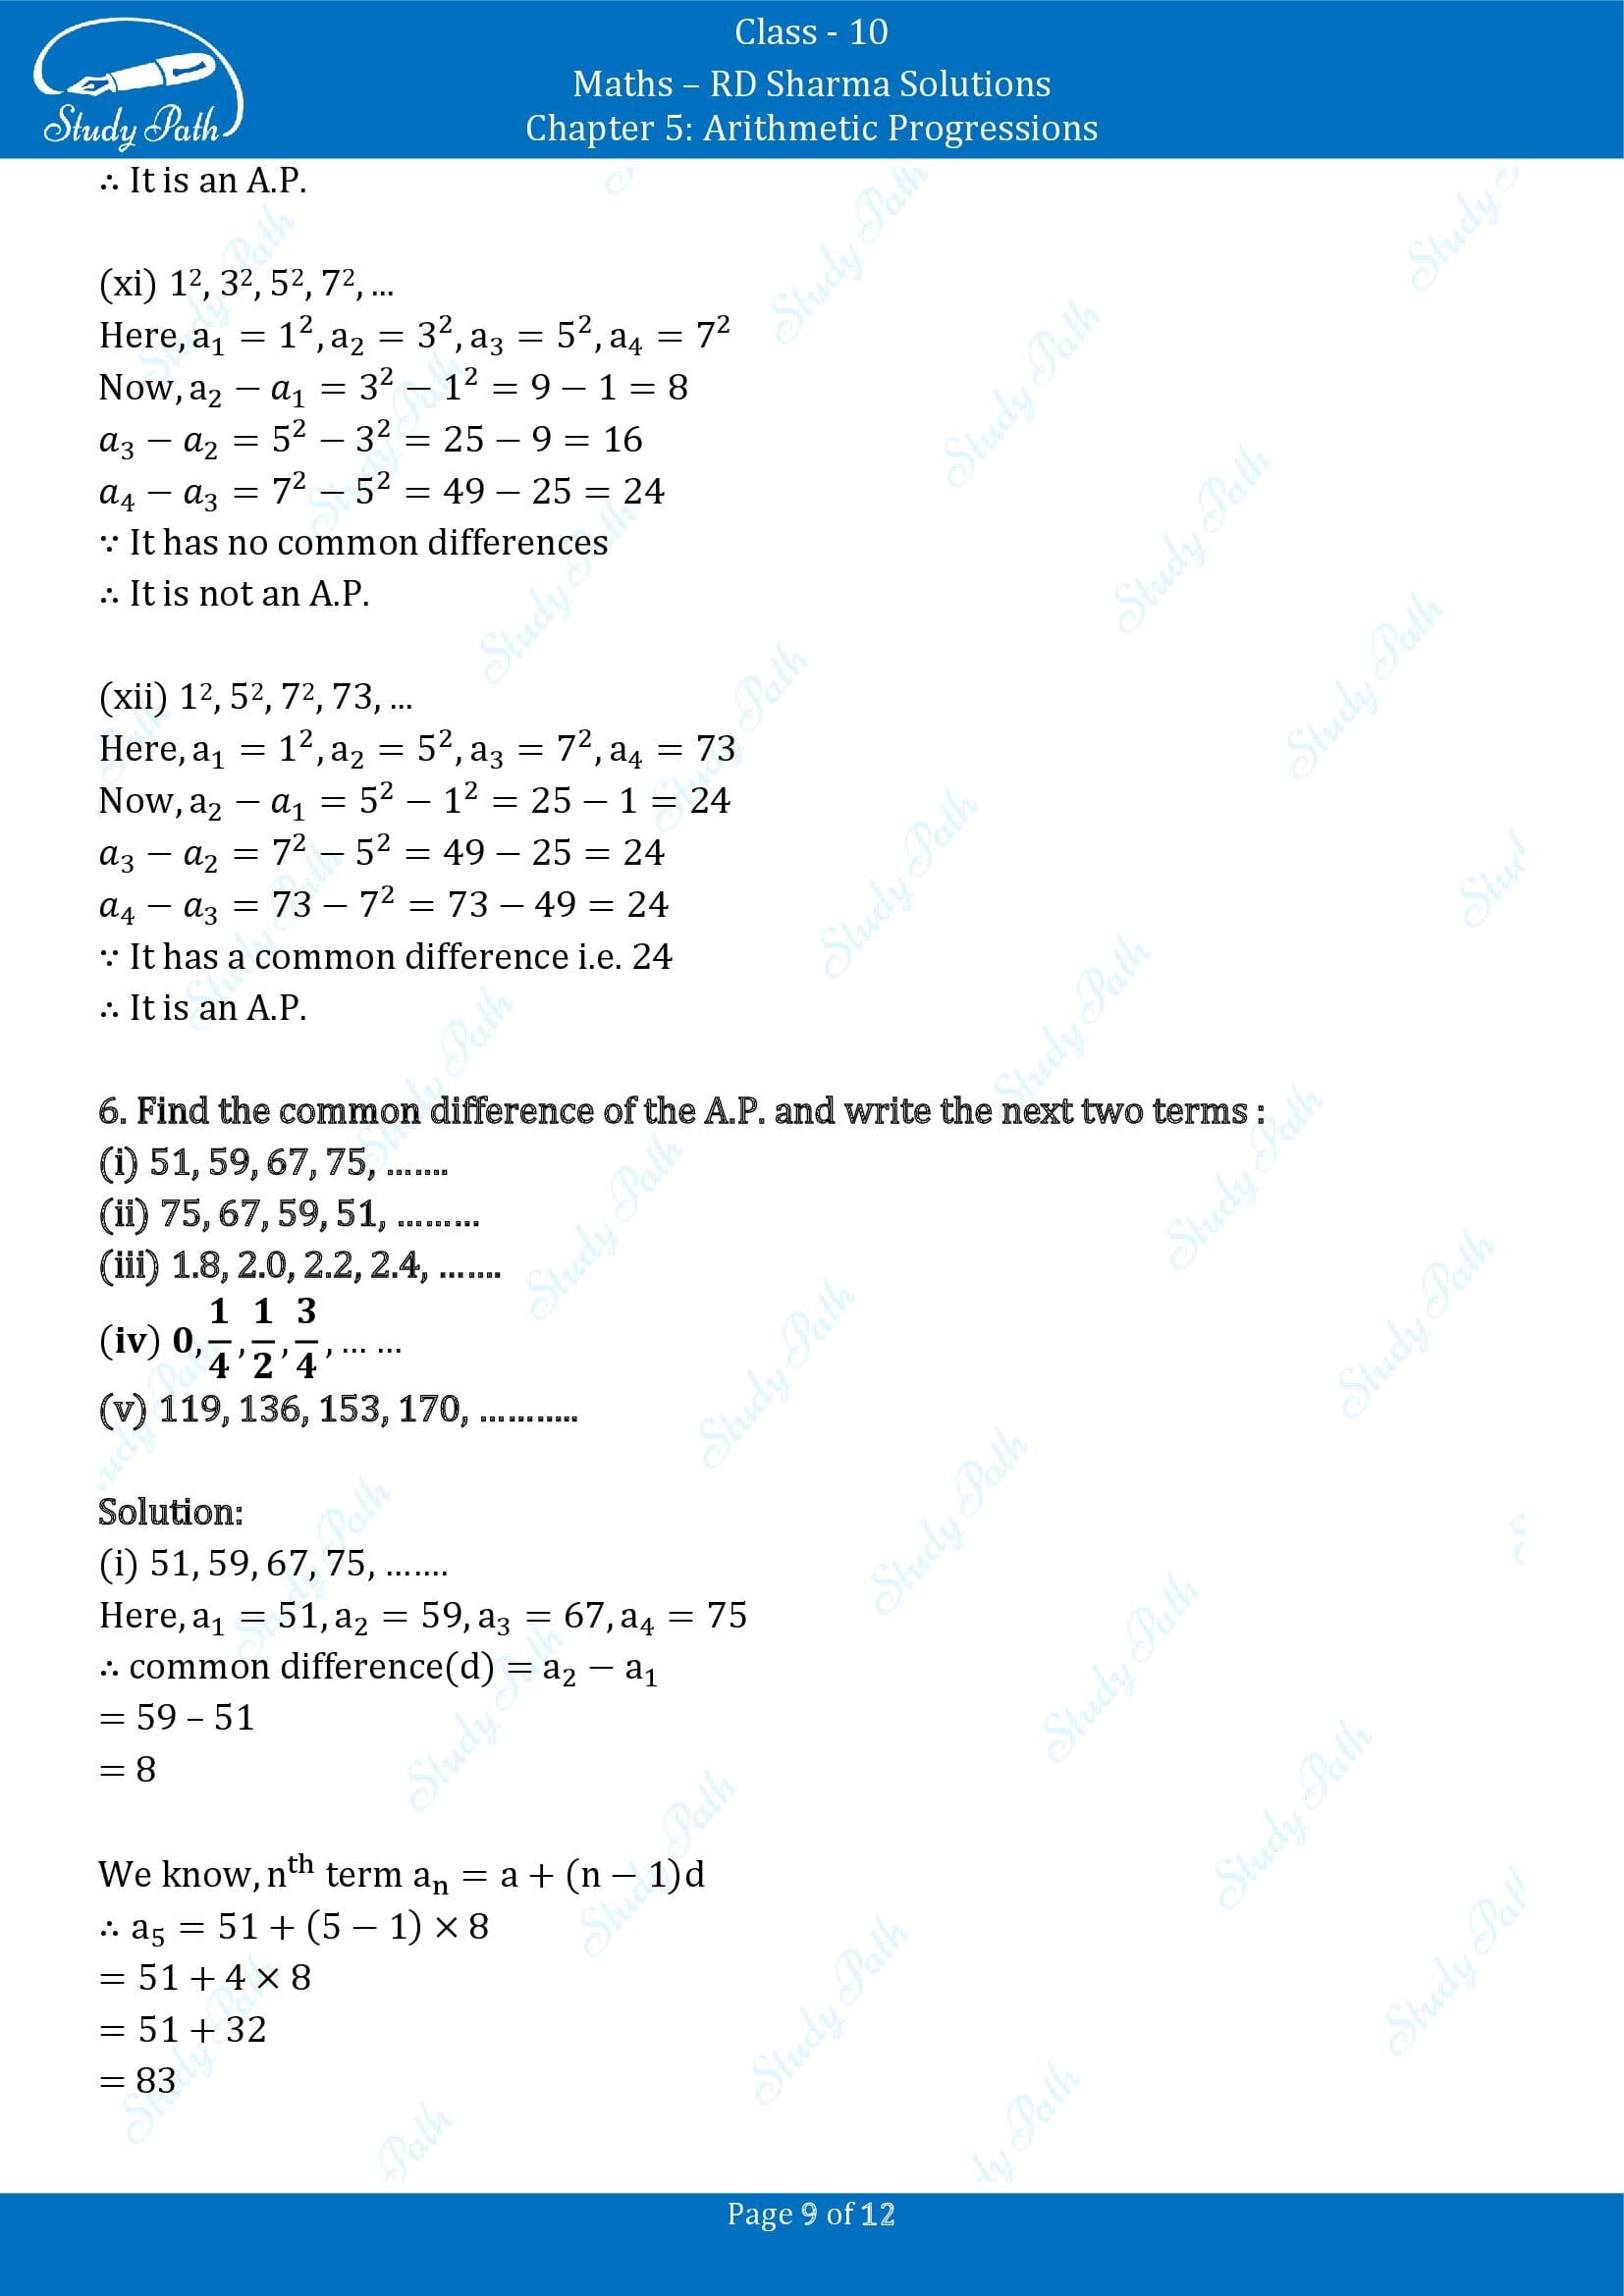 RD Sharma Solutions Class 10 Chapter 5 Arithmetic Progressions Exercise 5.3 00009